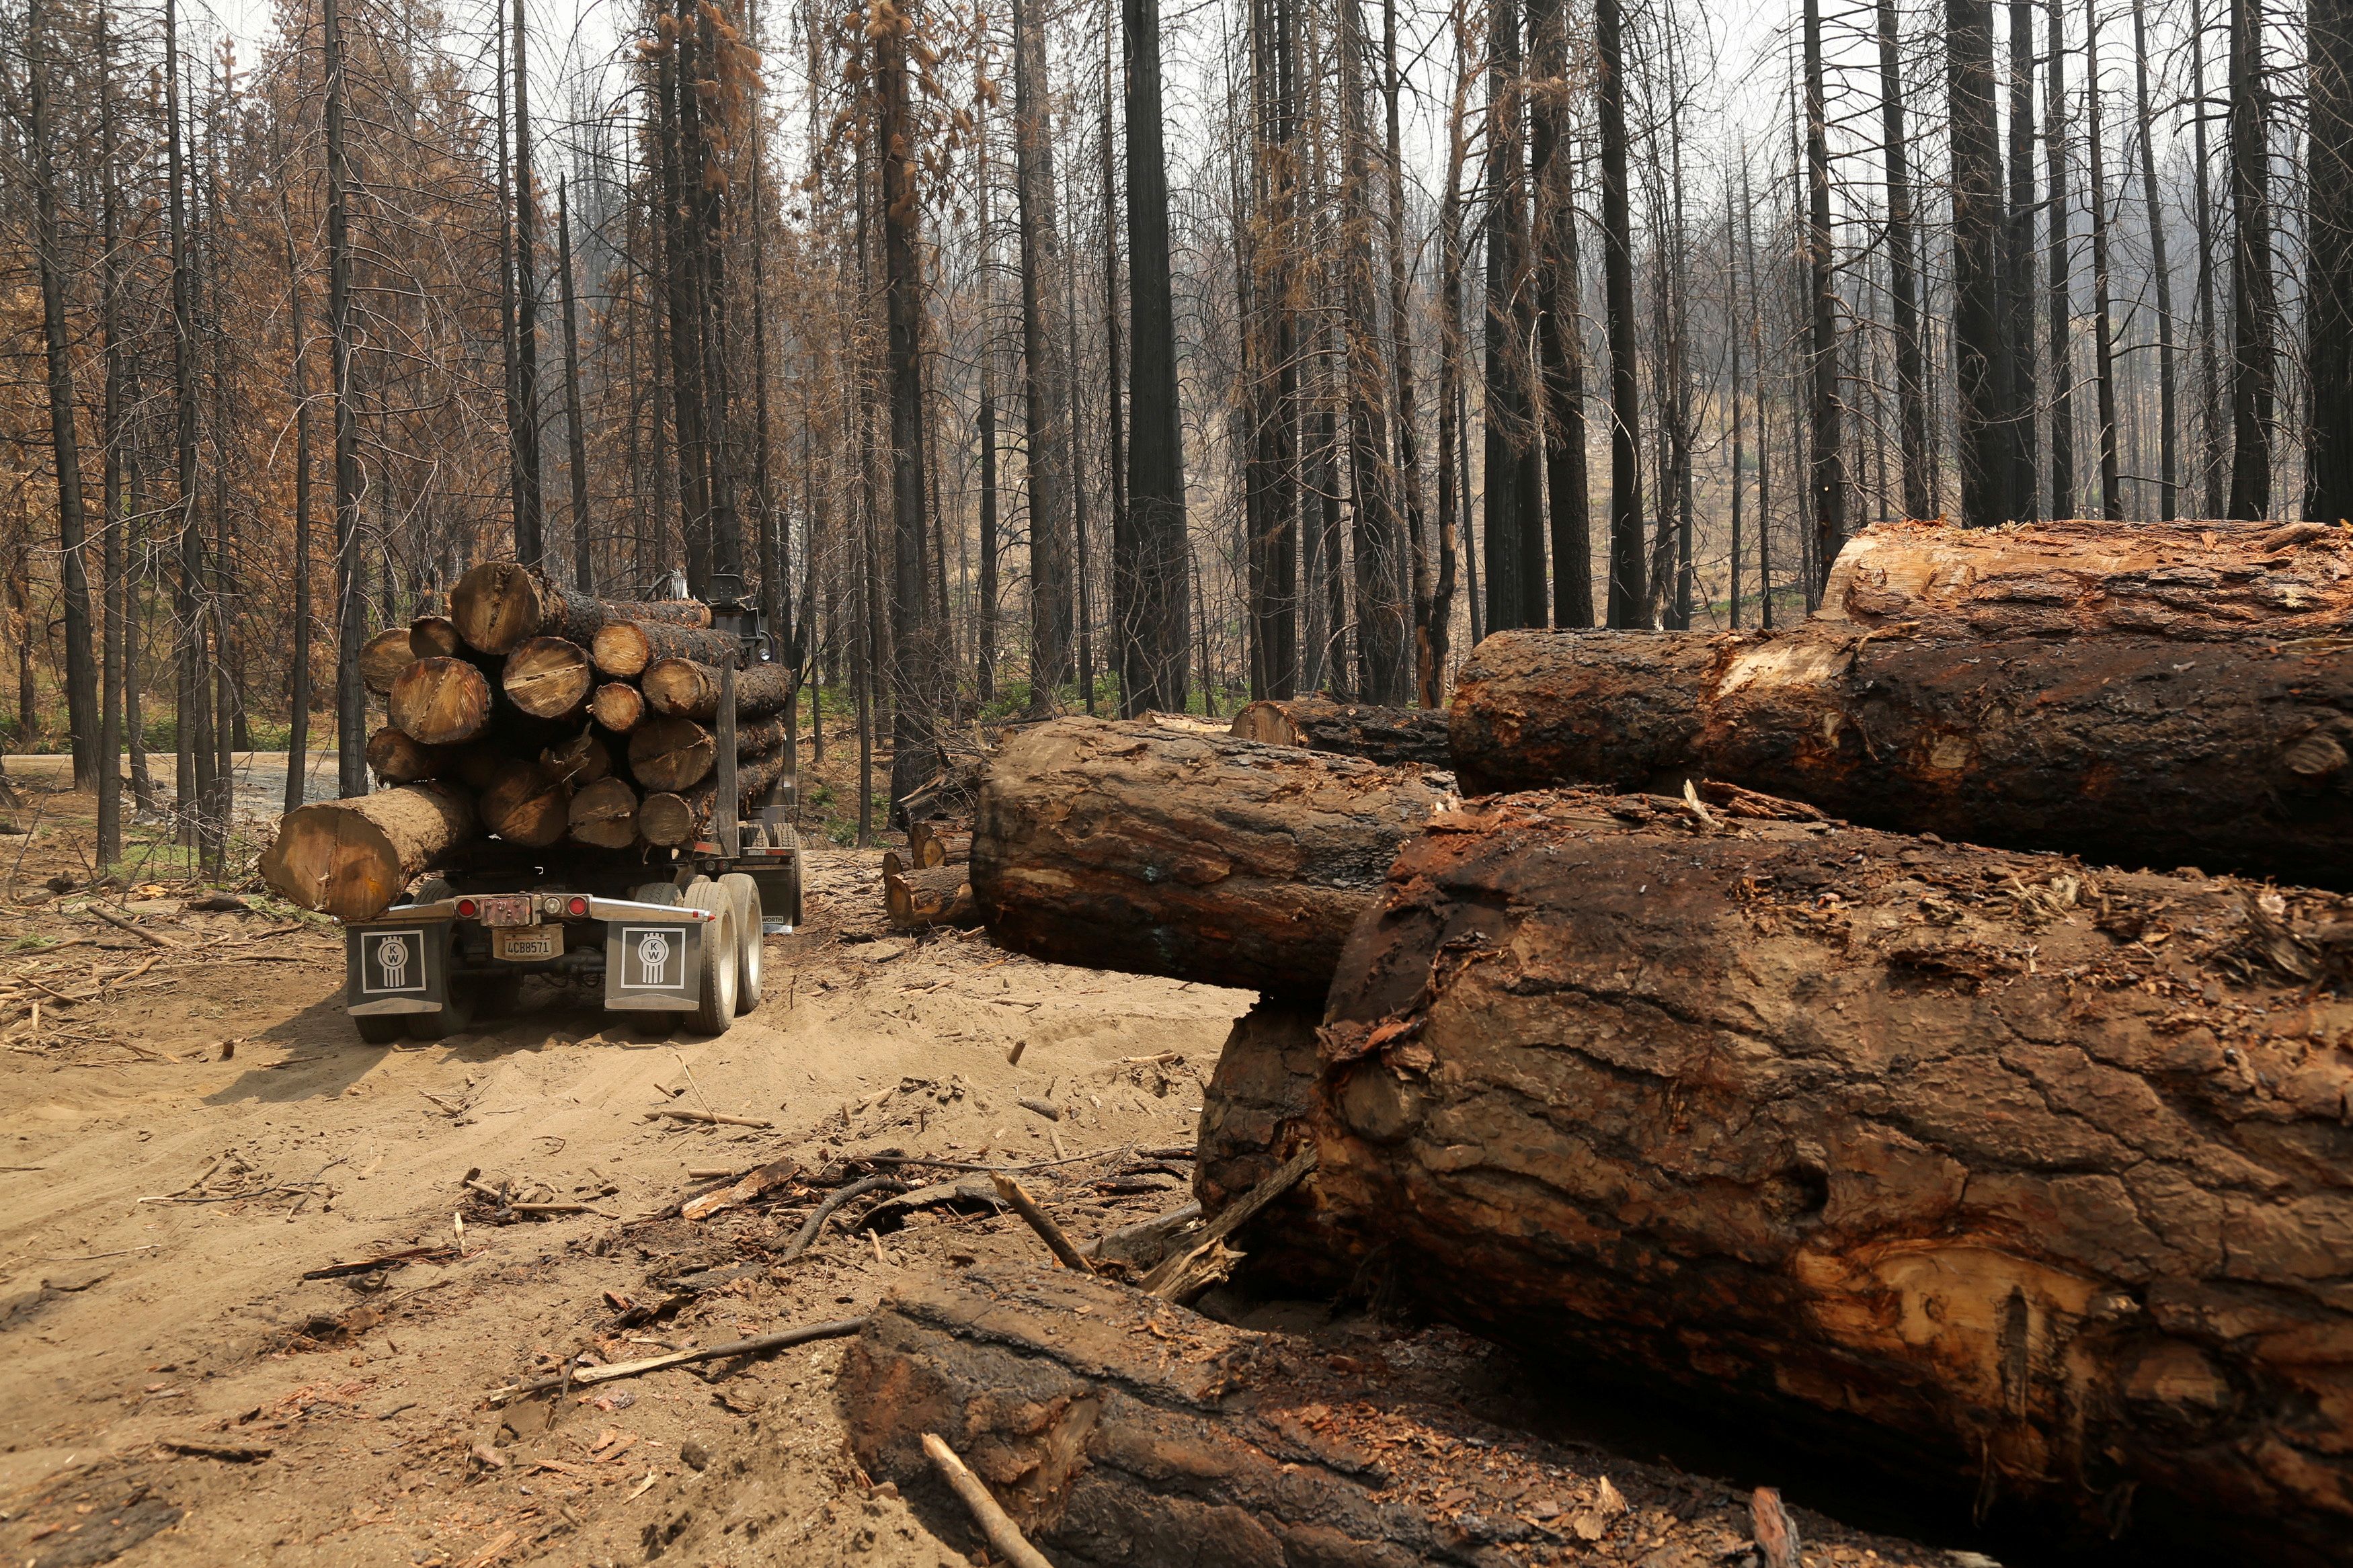 A logging truck is pictured among burned trees, felled following last year's Rim fire, near Groveland, California July 30, 2014. Long, heavy logging trucks, swaying with the weight of charred California pines, wind through the forest near Yosemite National Park, part of an effort to clean up from last year's devastating wildfires even as new blazes break out this summer. To match Feature USA-CALIFORNIA/WILDFIRES-TREES  REUTERS/Robert Galbraith  (UNITED STATES - Tags: ENVIRONMENT DISASTER)